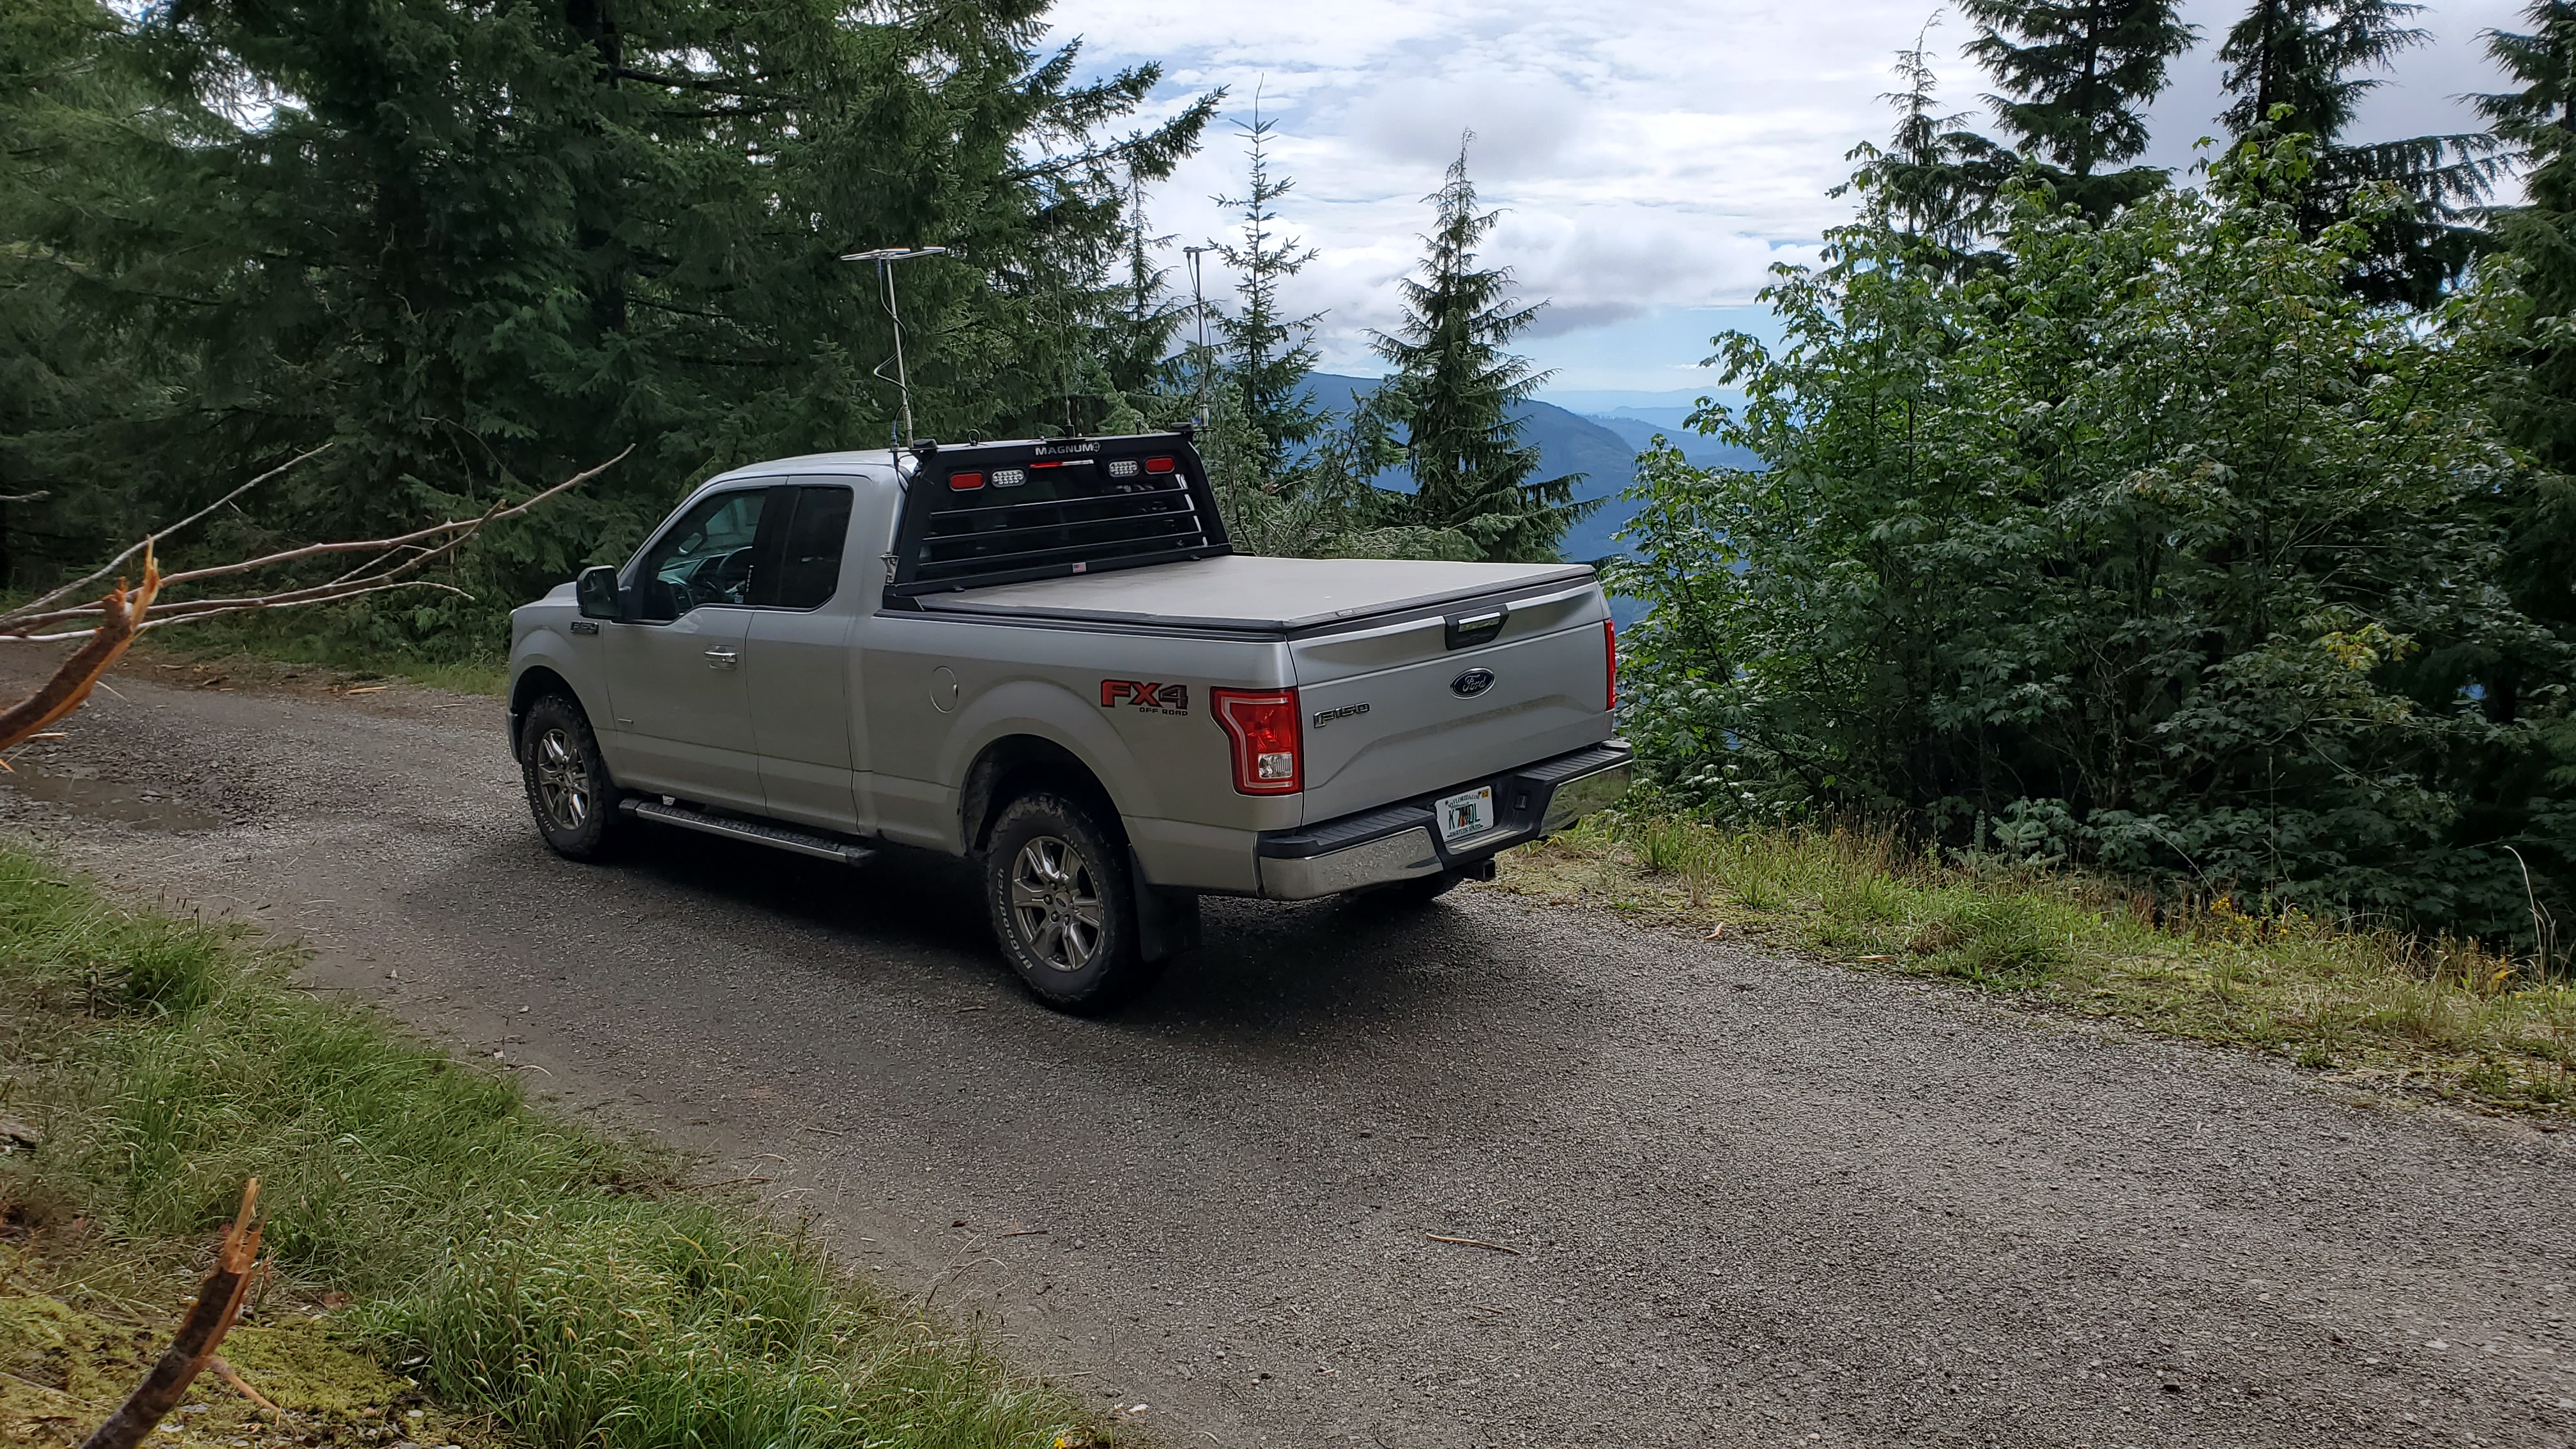 K7MDL/R rover truck with daily driver 3 band setup. On Green Mtn CN98 at 3K ft for the Sept 2021 VHF contest.
